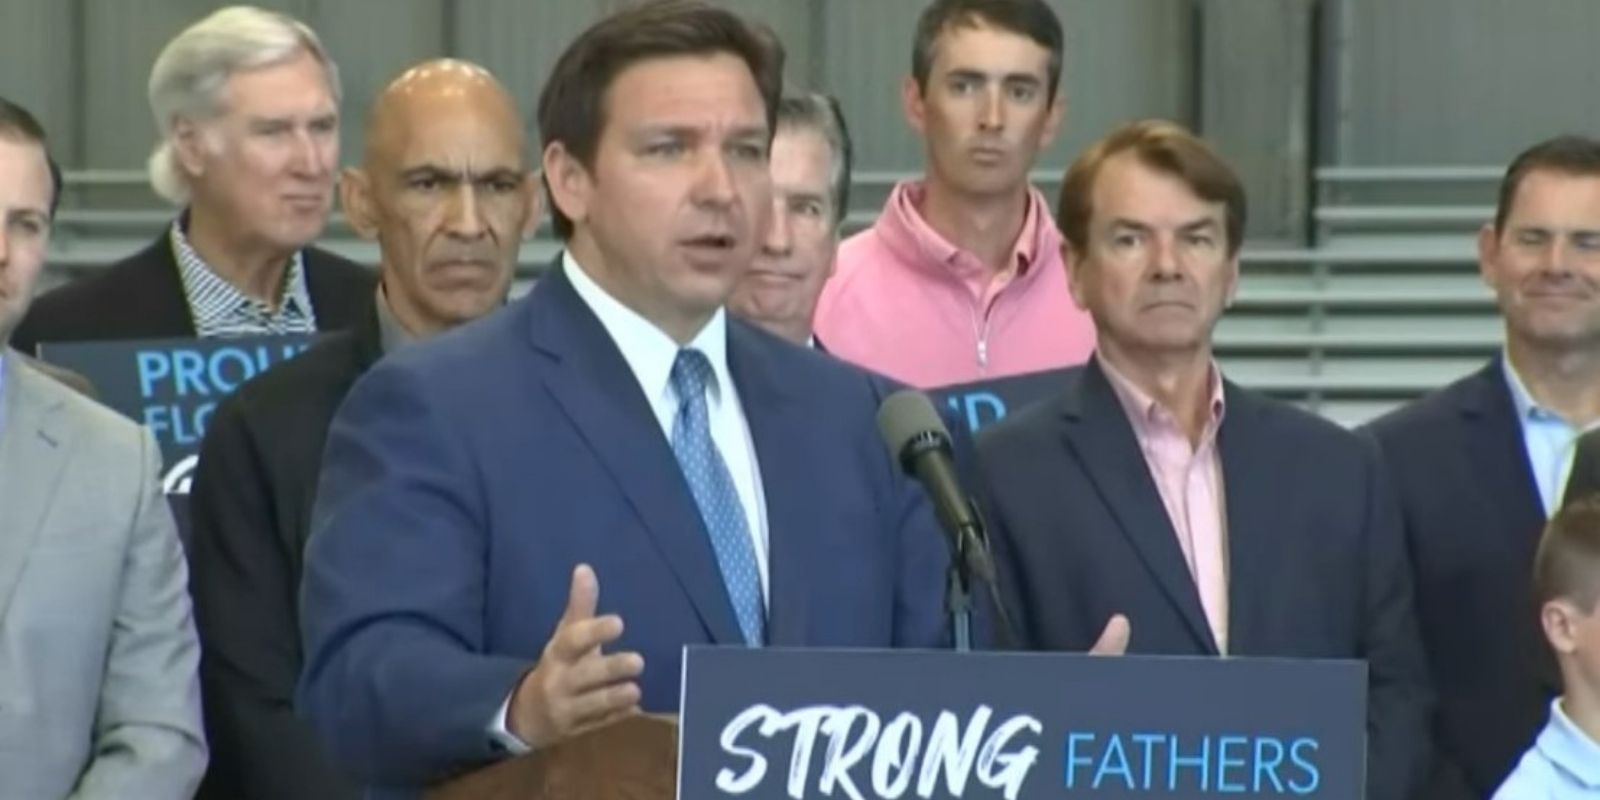 BREAKING: DeSantis signs bill investing $70 million into programs to support fatherhood